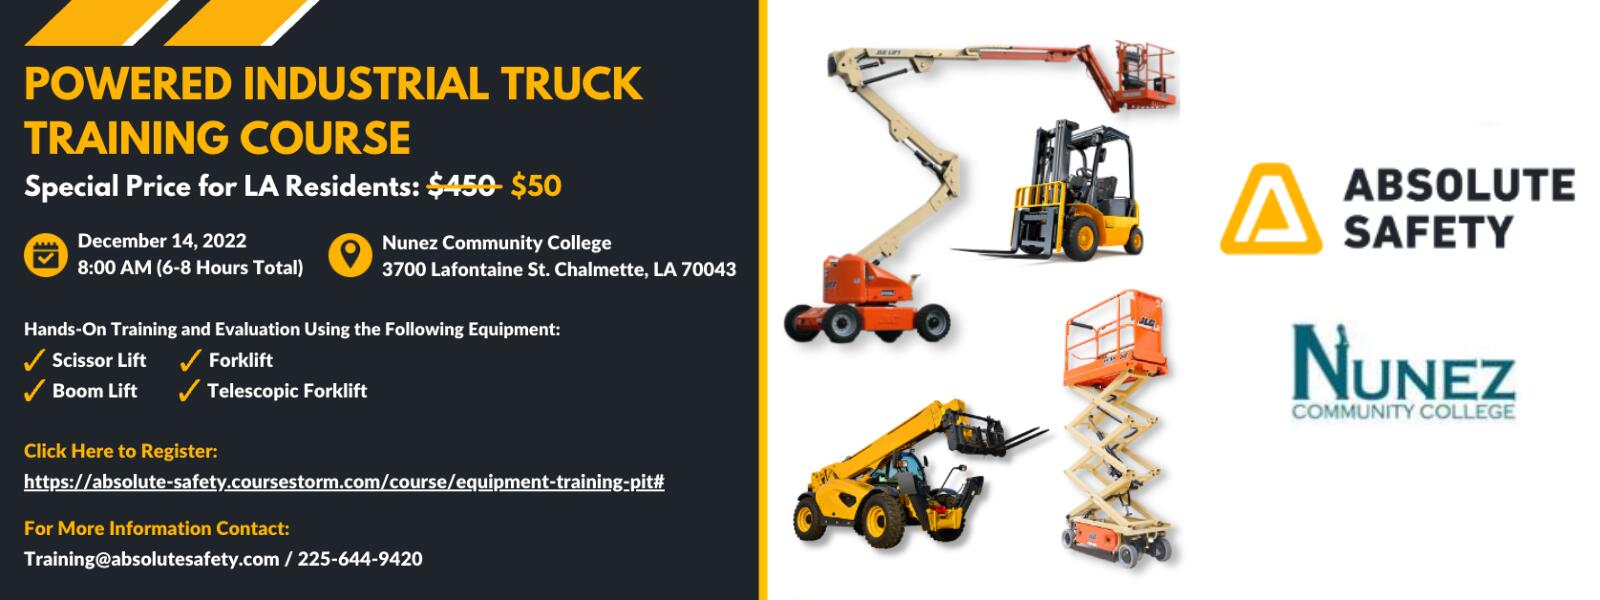 Powered Industrial Truck Training Course - Click Here to Register